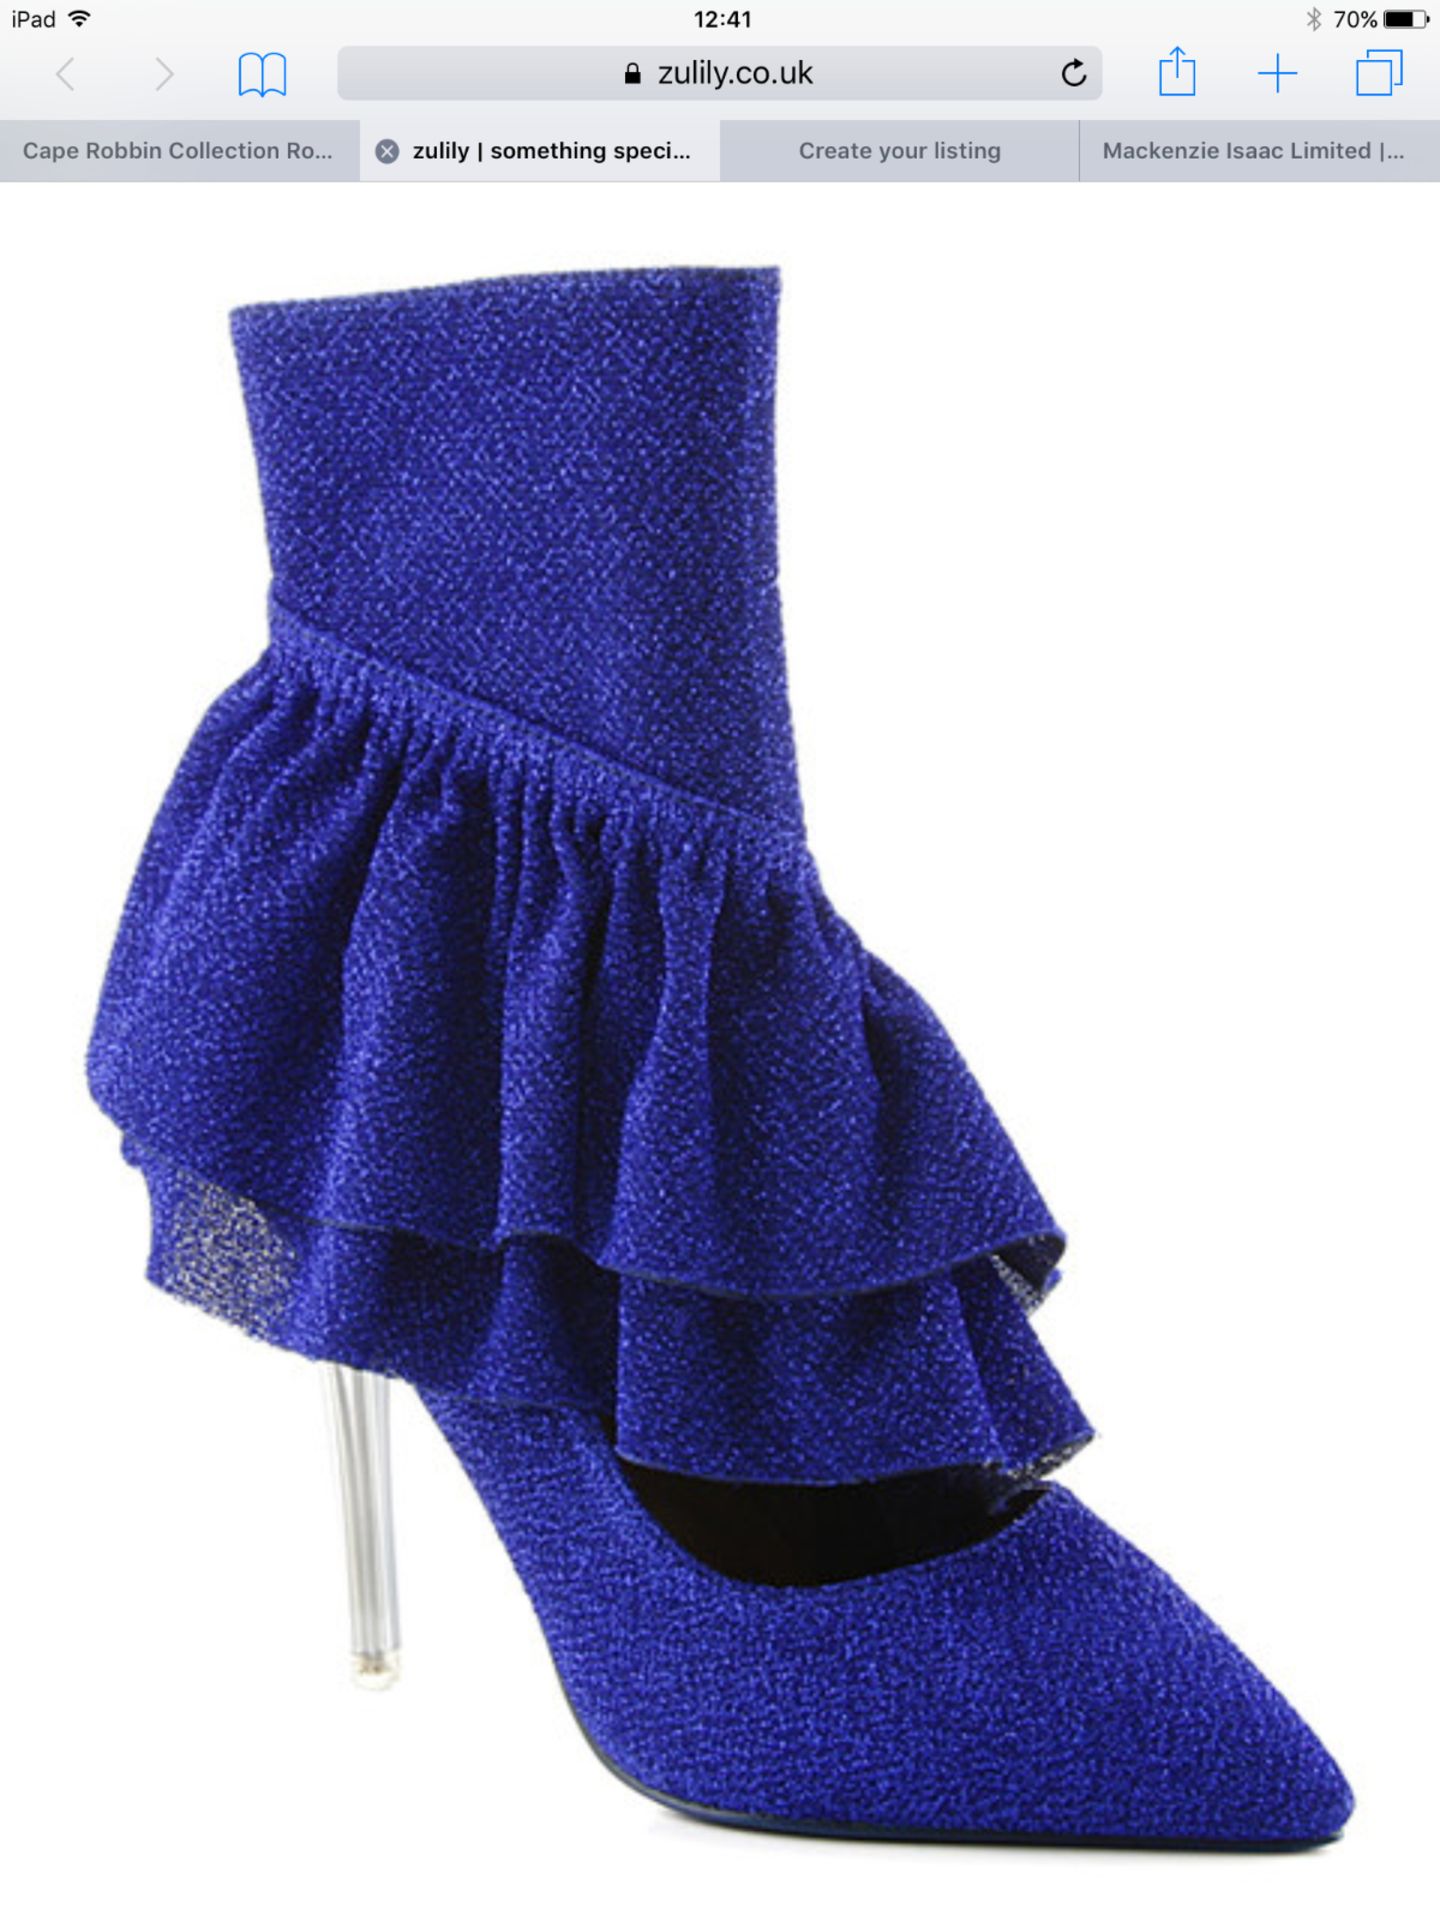 Cape Robbin Collection Royal Blue Beatrix Ruffle Boot, Size Eur 39, Rrp £59.99 (New With Box) [